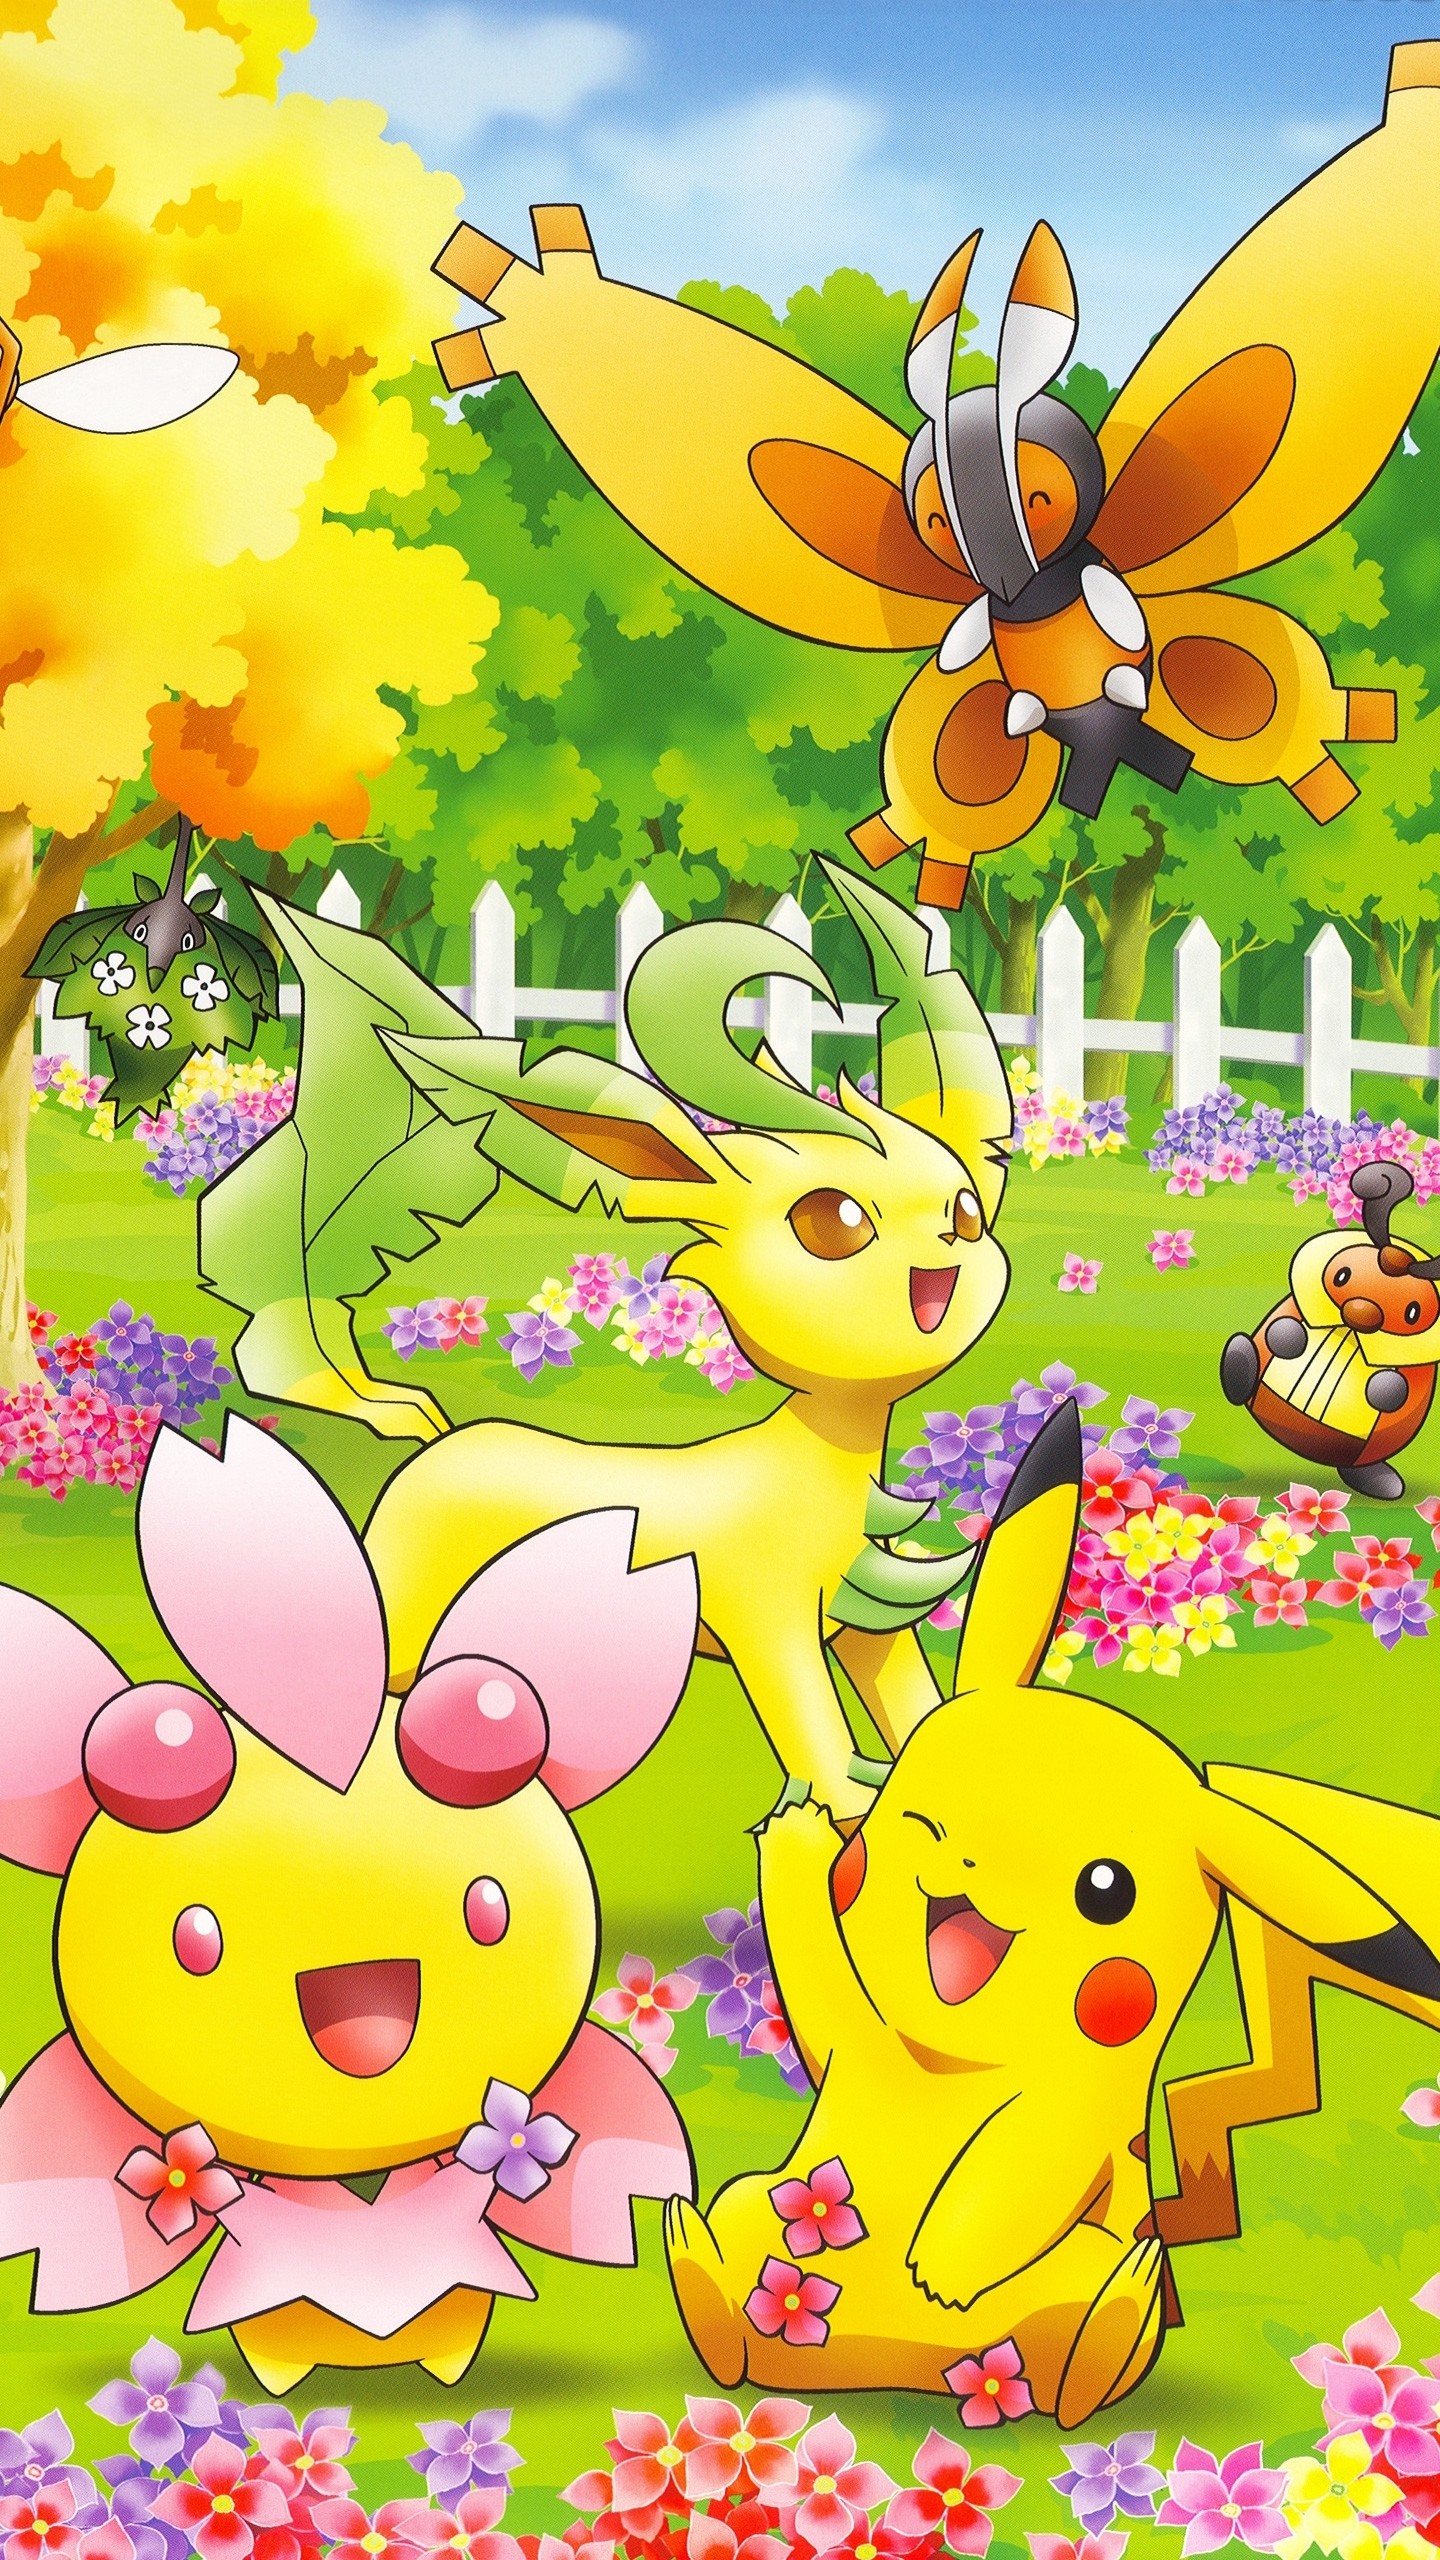 Cute Pokemon characters Game mobile wallpaper